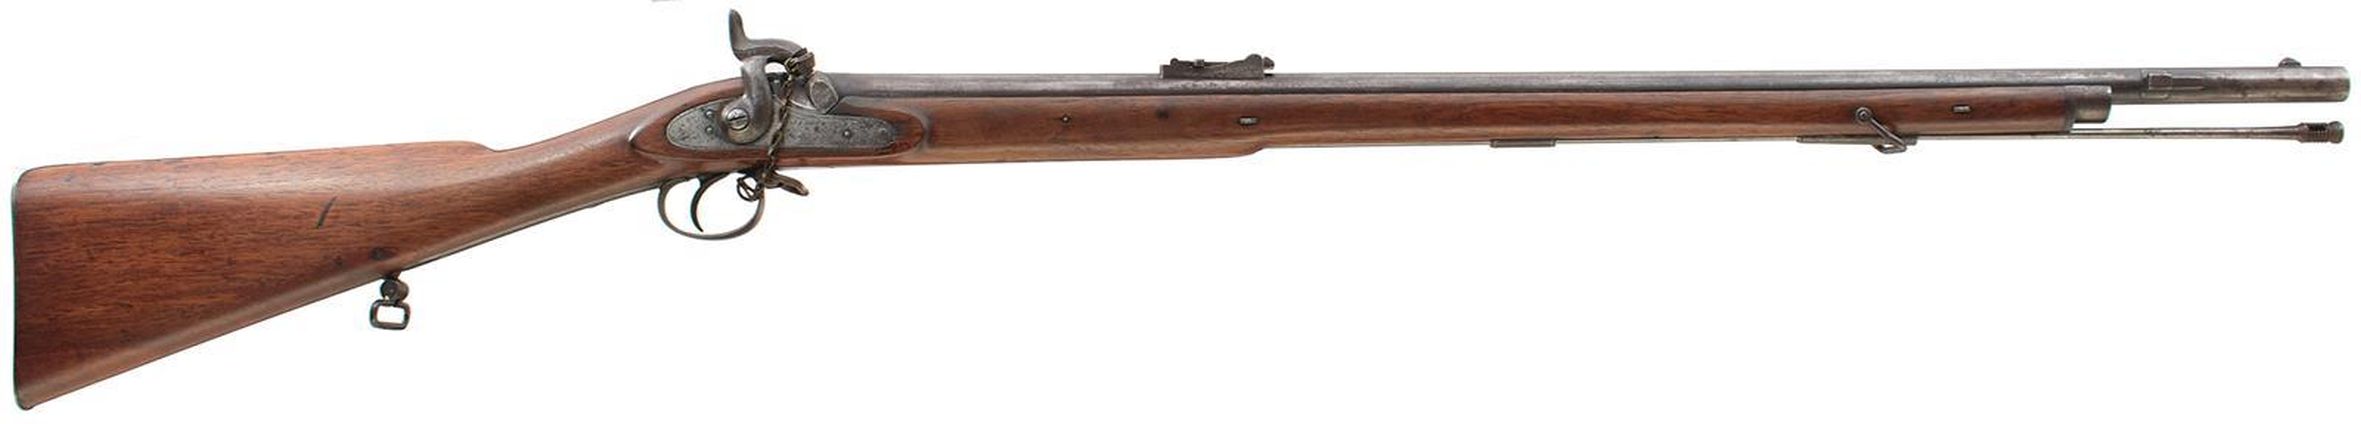 A .577 CALIBRE ENFIELD PERCUSSION VOLUNTEER PATTERN 1856 SHORT RIFLE, 33inch sighted barrel with